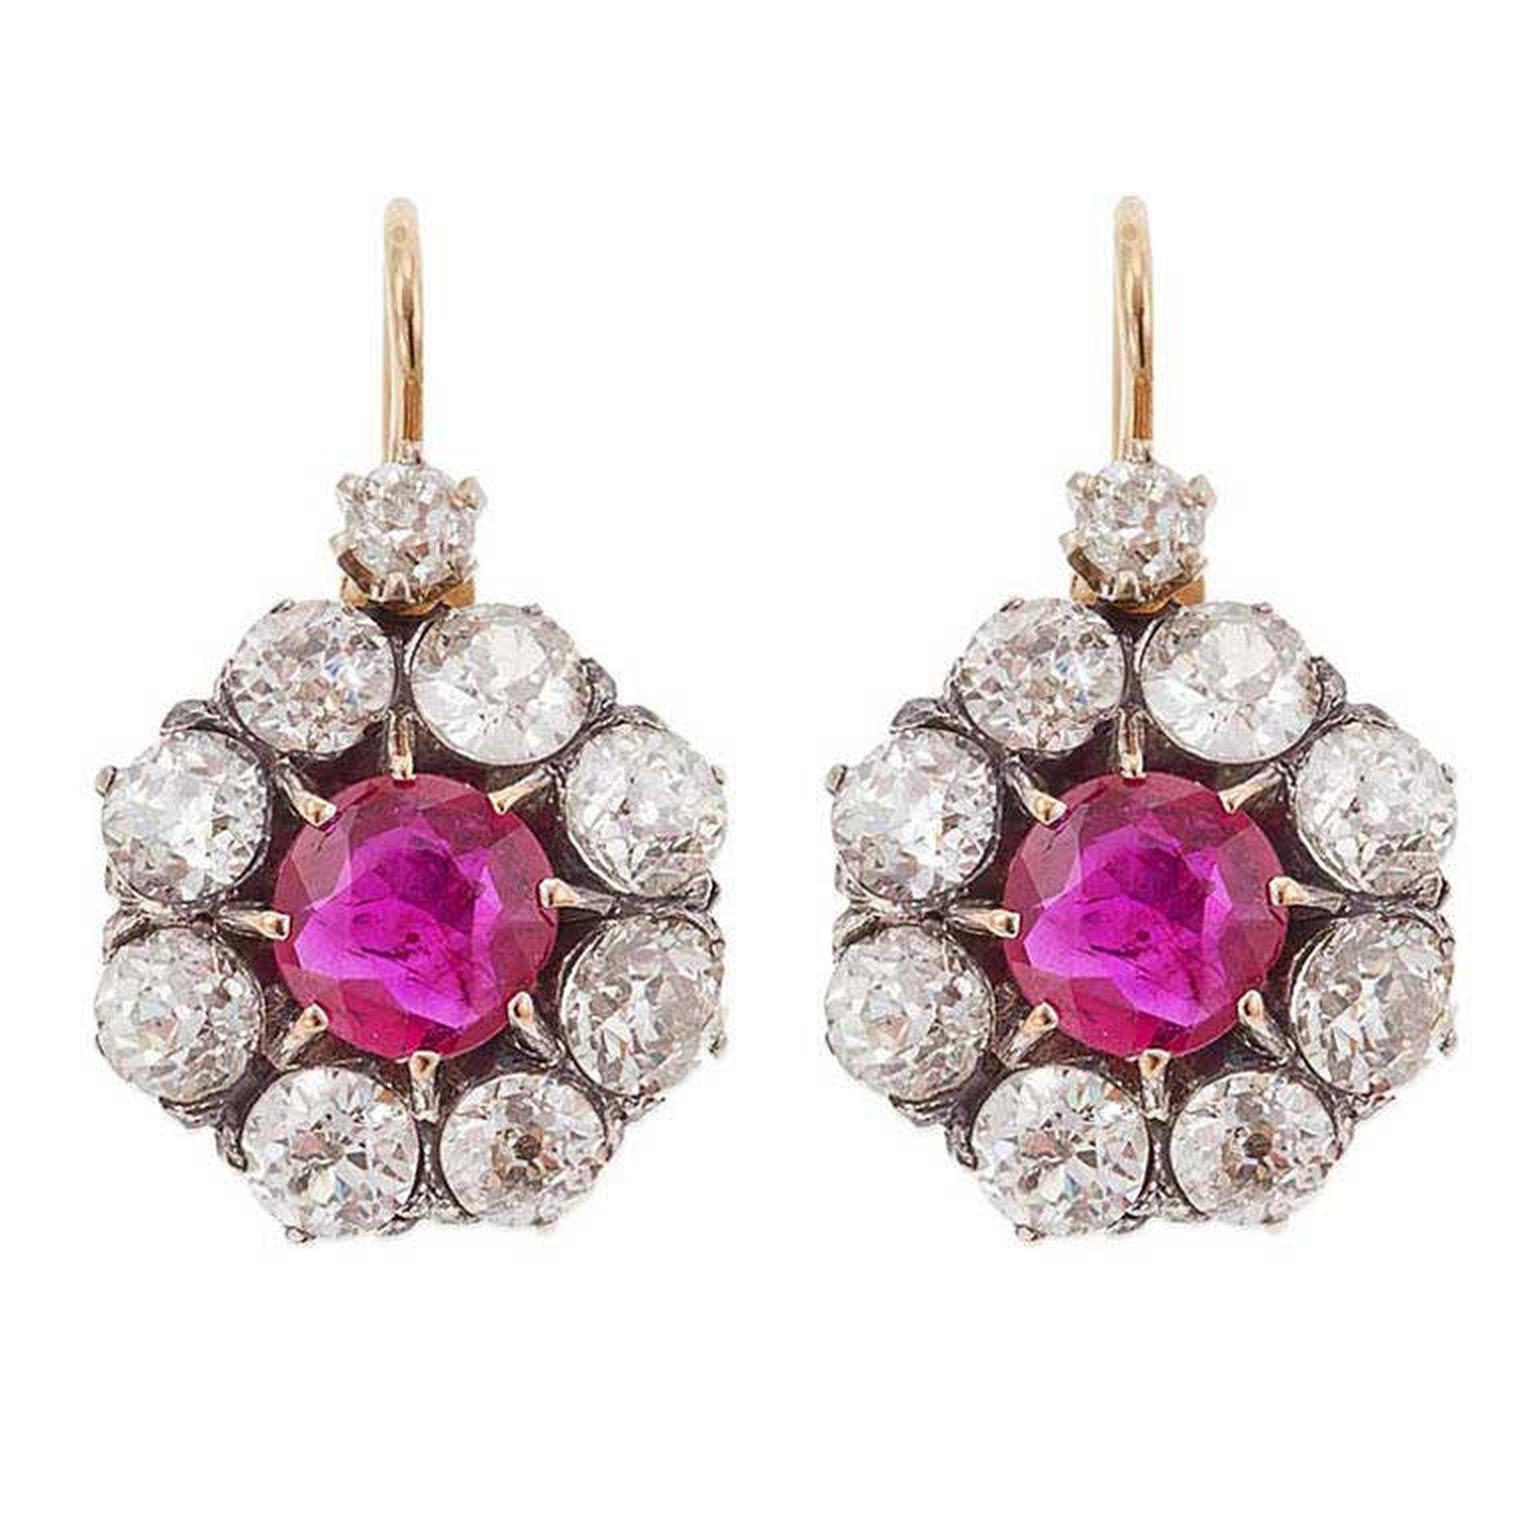 Sheila Goldfinger ruby cluster Victorian earrings with diamonds